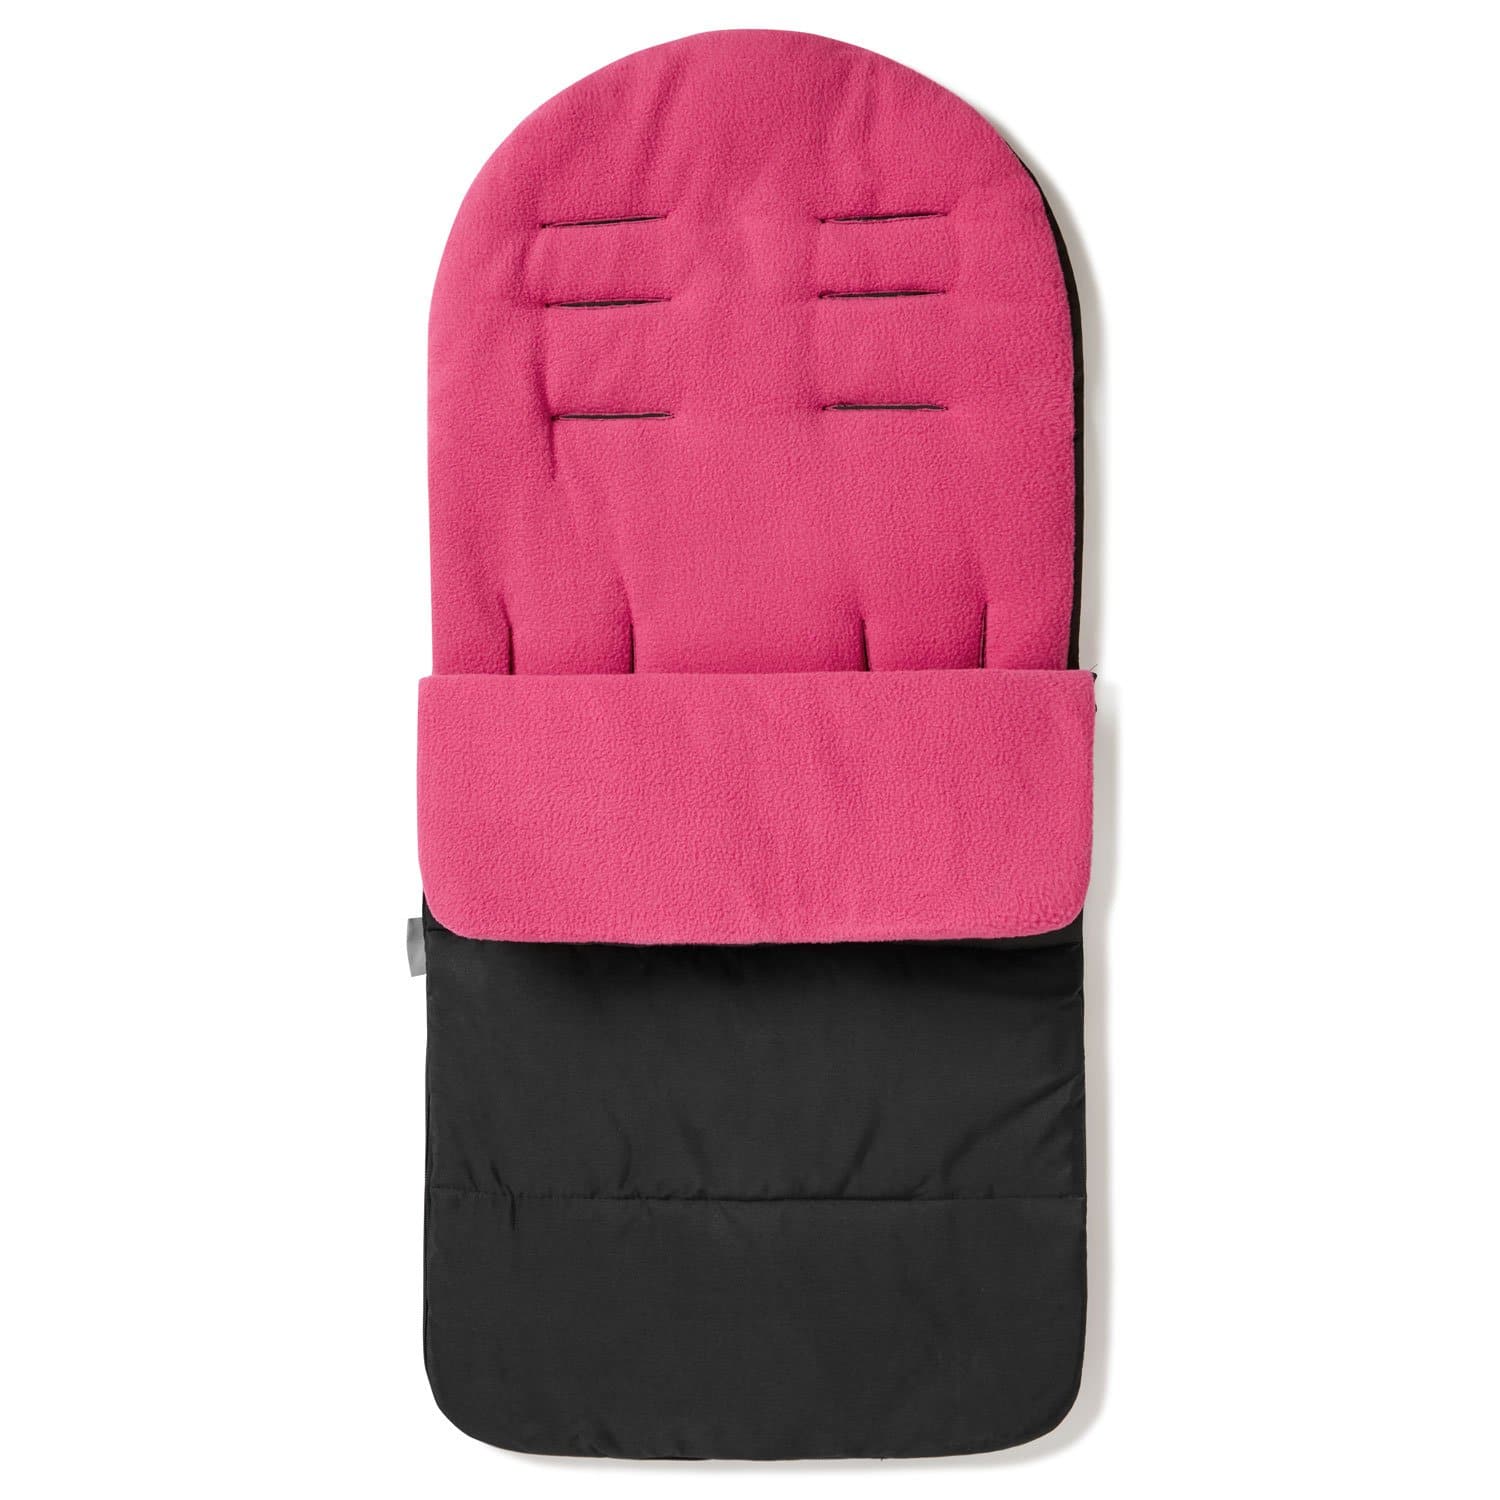 Premium Footmuff / Cosy Toes Compatible with Red Kite - Pink Rose / Fits All Models | For Your Little One